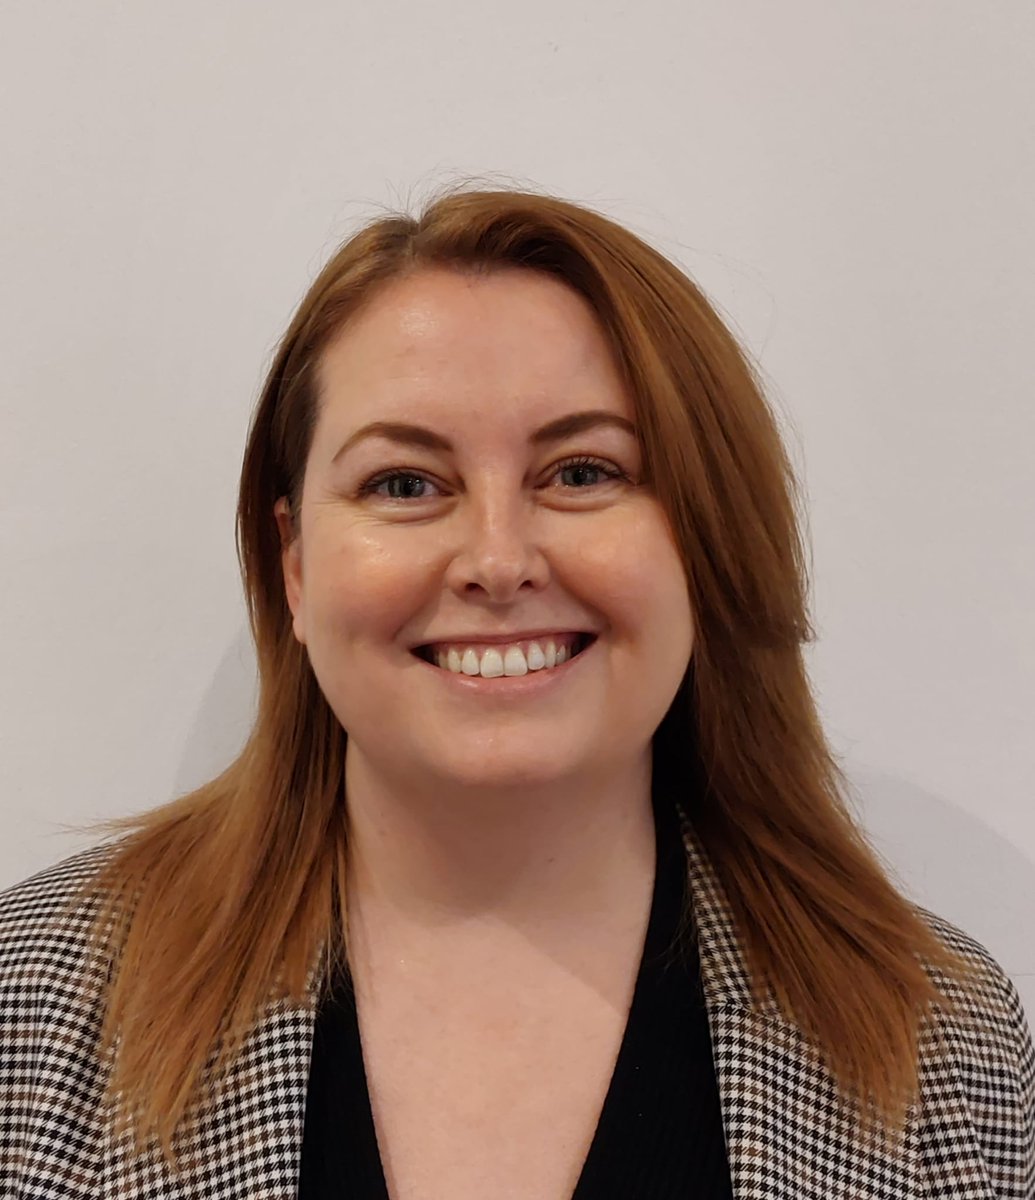 NEWS: Allianz unveils new commercial branch manager for Leeds and Newcastle

Following the commercial regions restructure announced last week Allianz has appointed Karen Boothroyd to the newly created role of branch manager for Leeds and Newcastle.

➡️ https://t.co/76sWiGIIZB https://t.co/y0zPxh6YpU